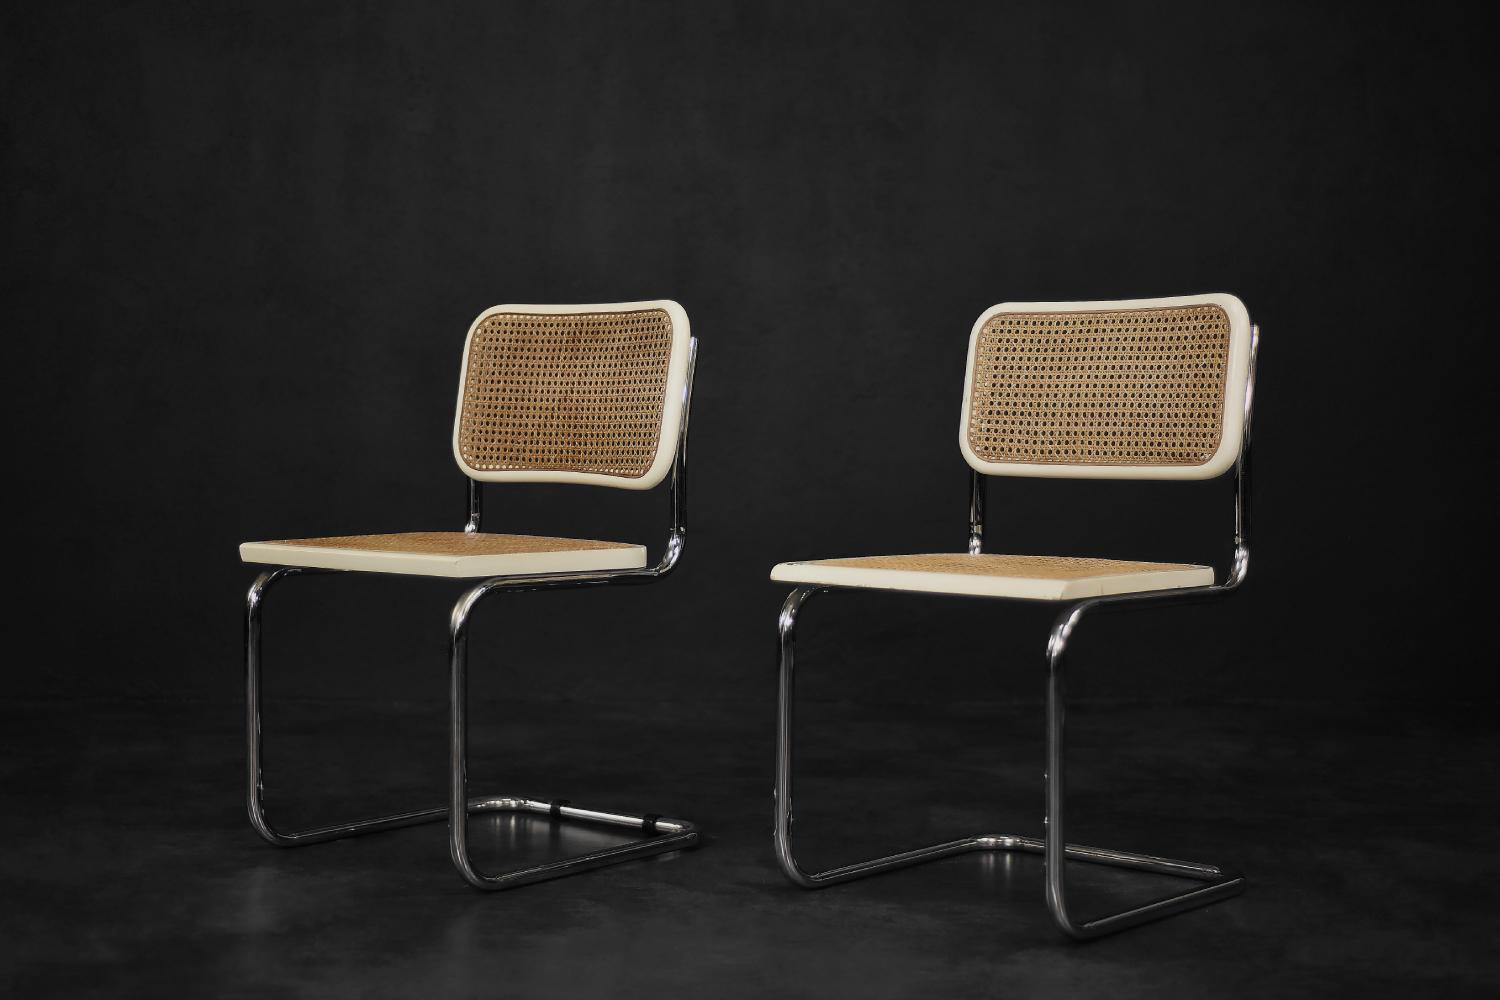 This set of two chairs was manufactured in Italy in the second half of the 20th century. The chairs are inspired by the famous Cesca B32 model. In 1928, Cesca was the first caned seat of its kind, designed by Marcel Breuer. The name was a tribute to